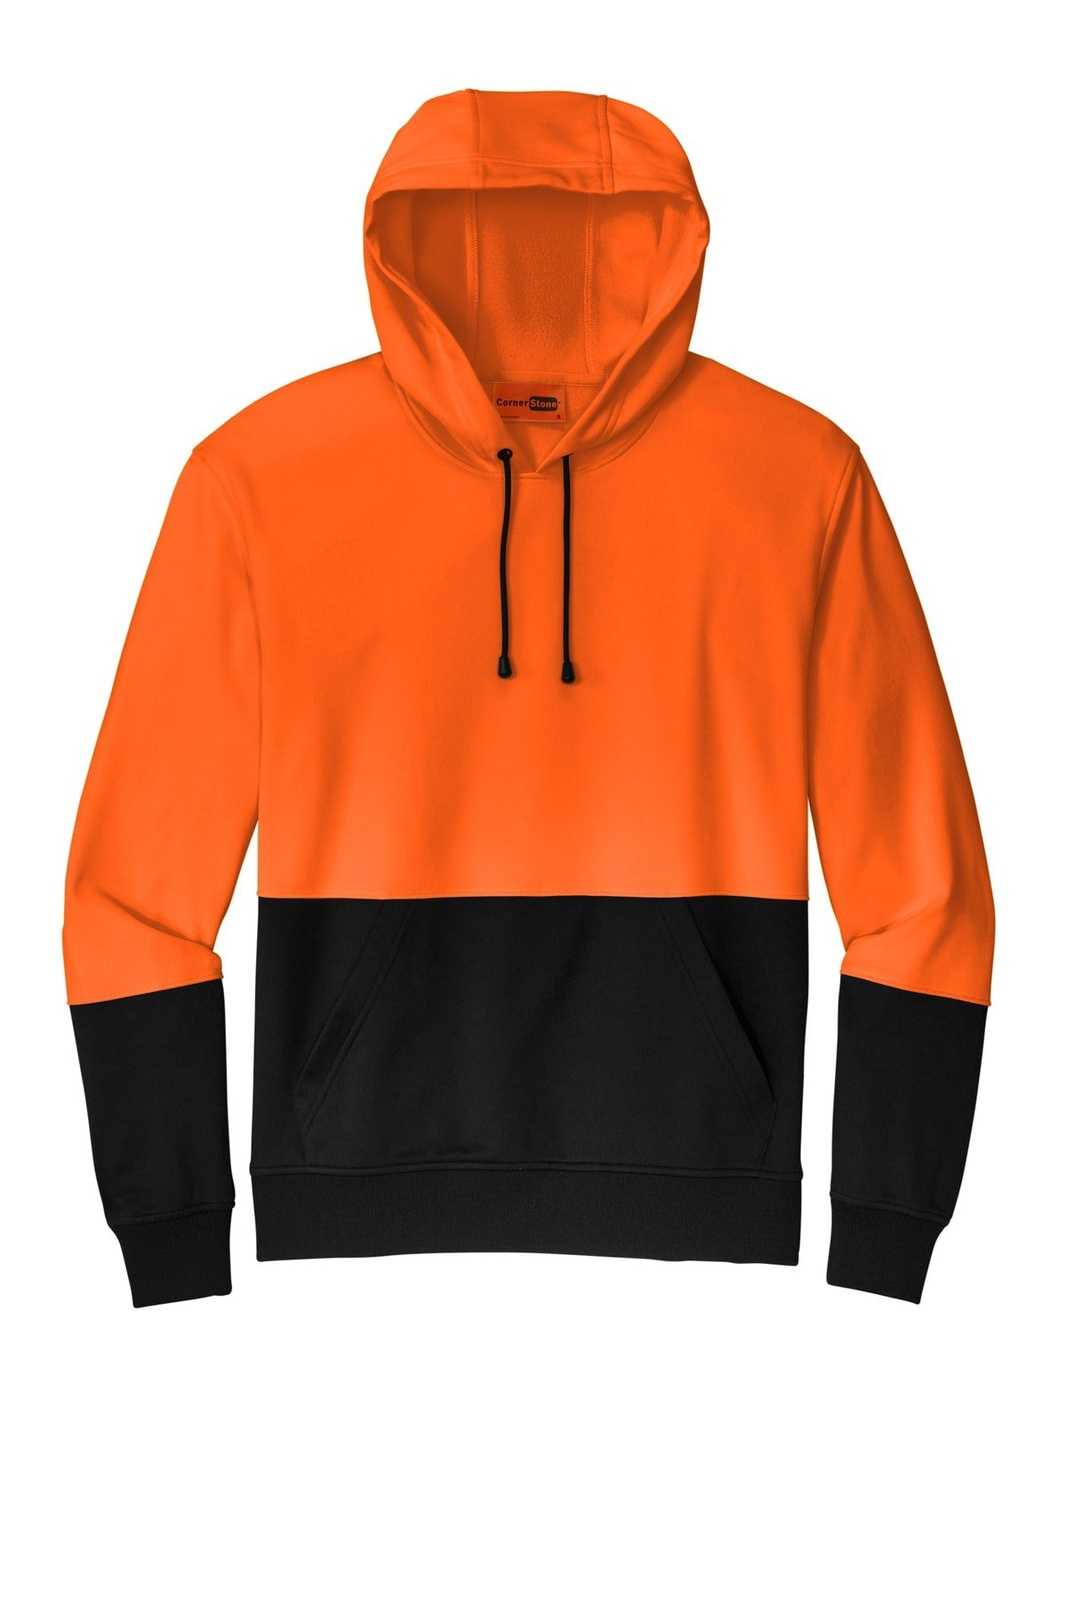 CornerStone CSF01 Enhanced Visibility Fleece Pullover Hoodie - Safety Orange - HIT a Double - 1